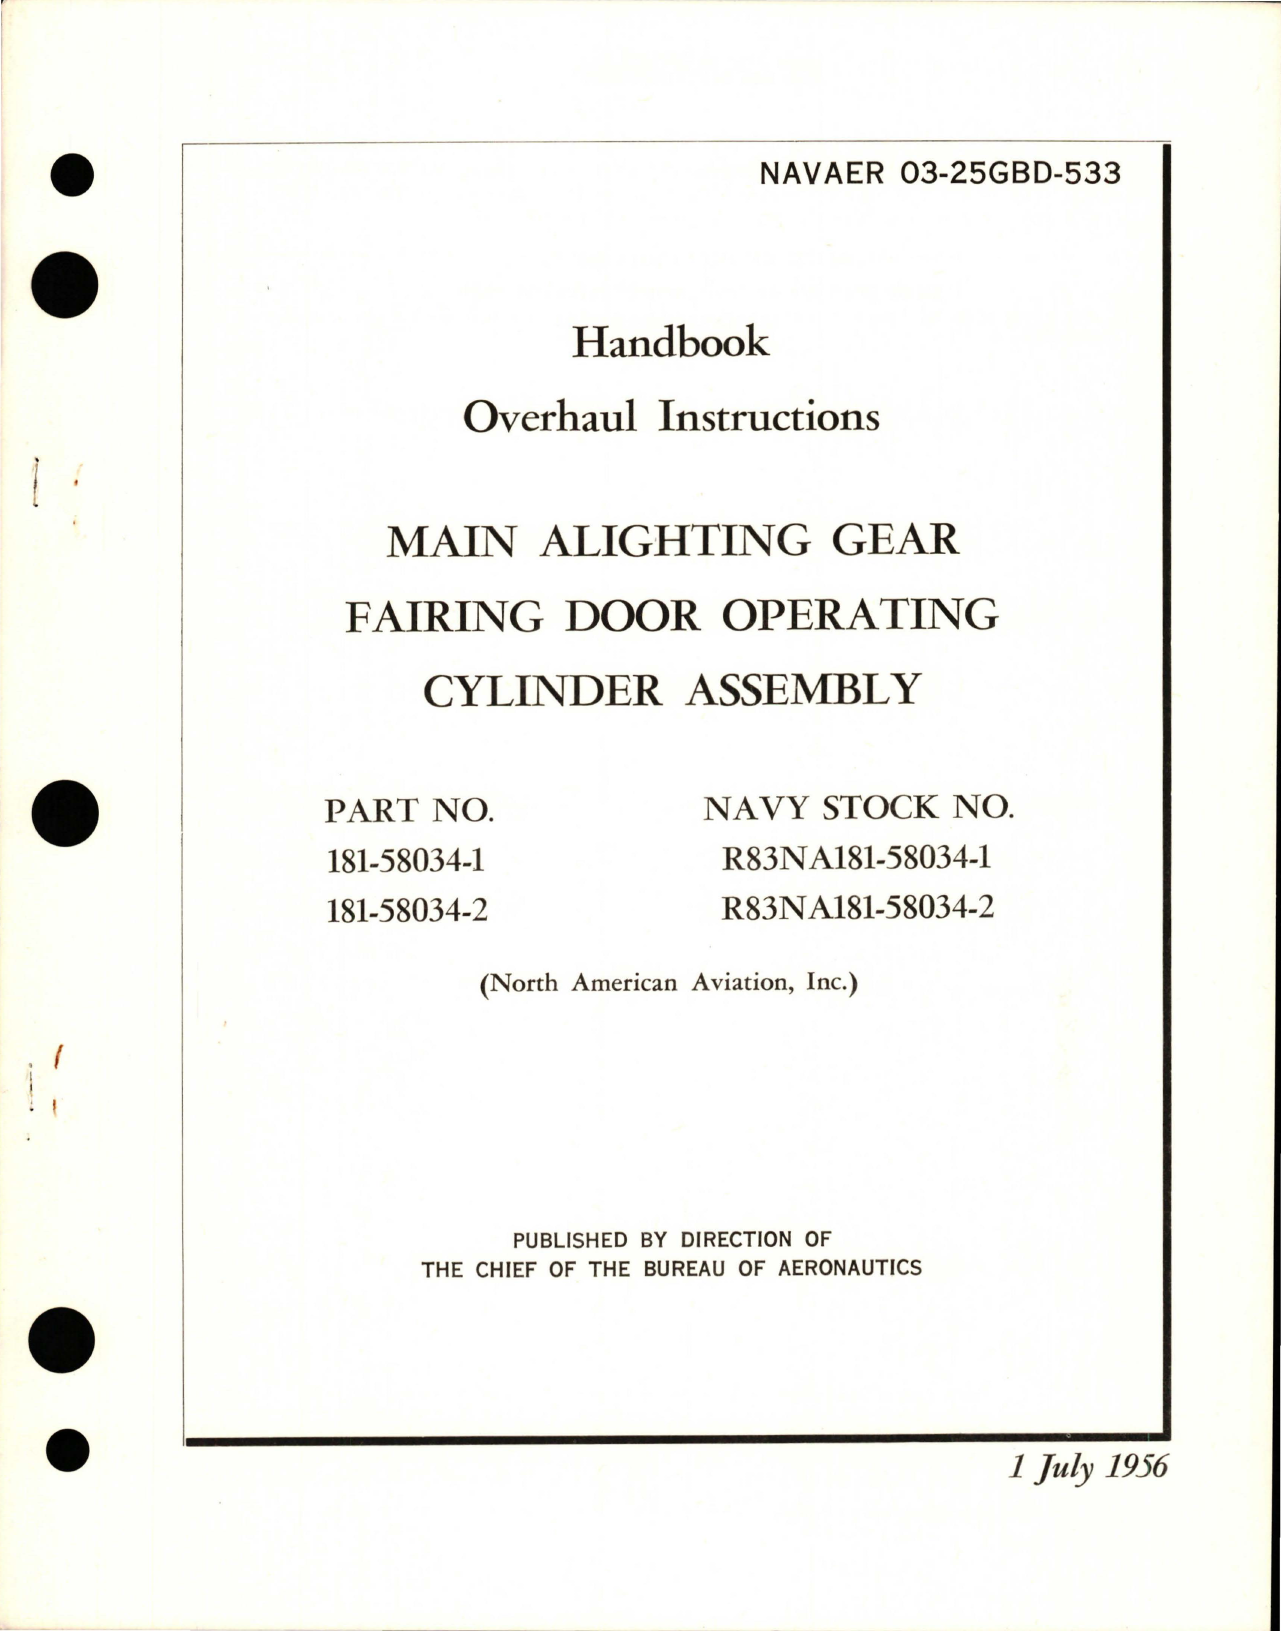 Sample page 1 from AirCorps Library document: Overhaul Instructions for Main Alighting Gear Fairing Door Operating Cylinder Assembly - Parts 181-58034-1 and 181-58034-2 